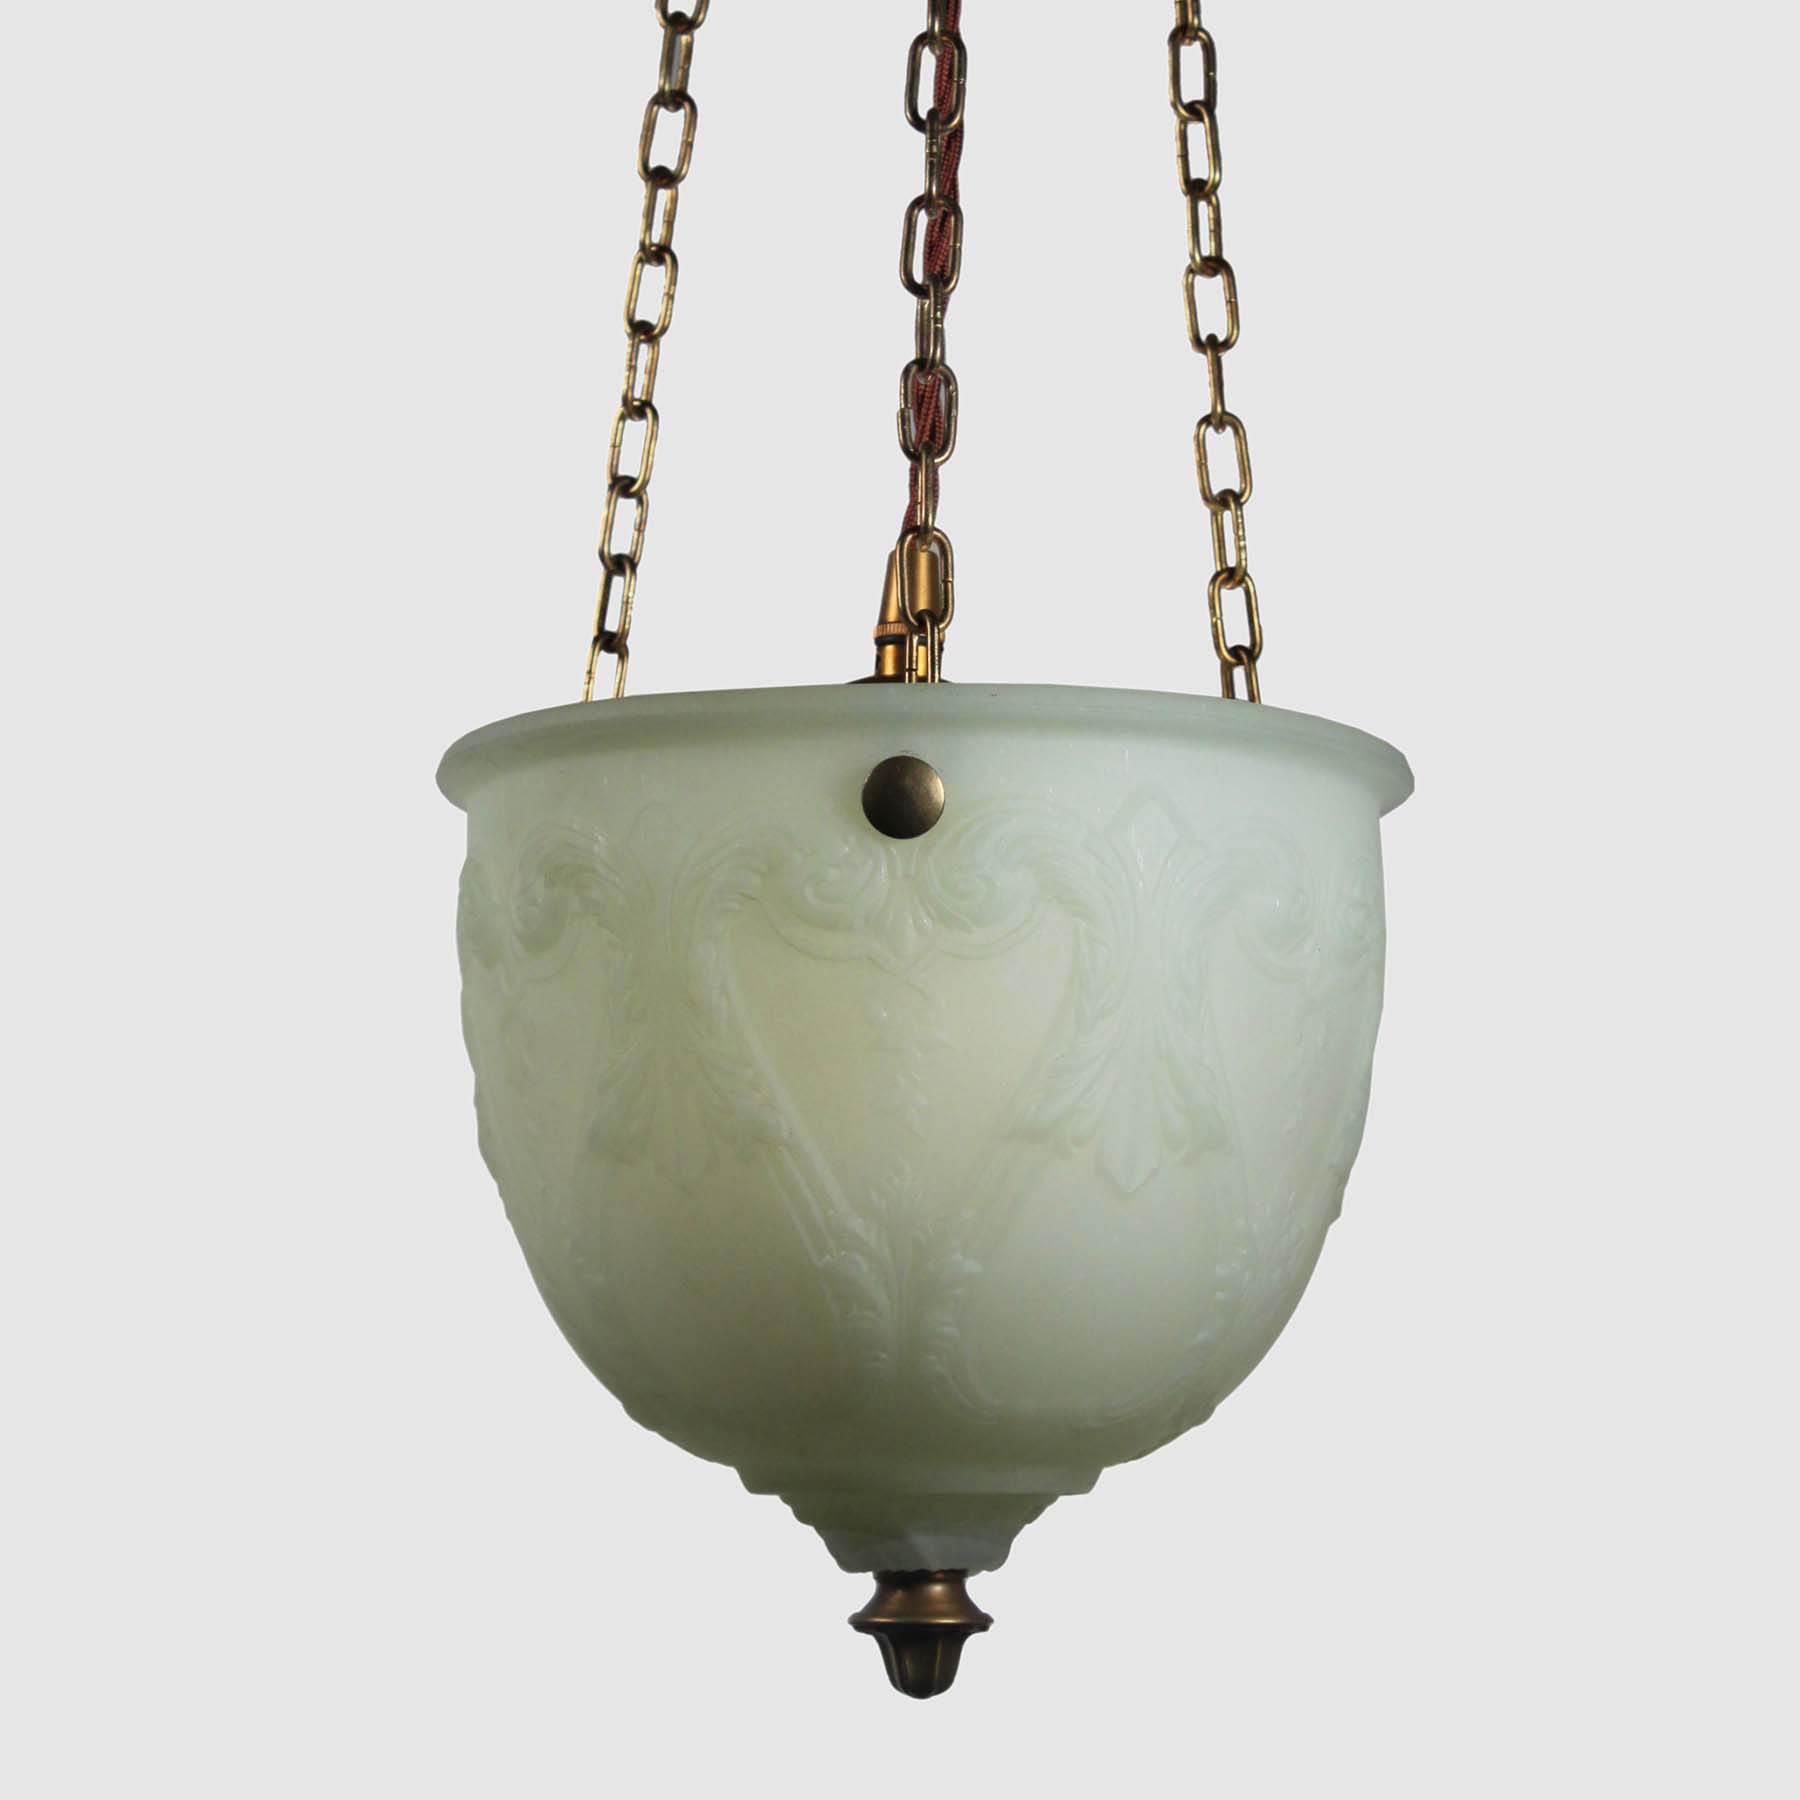 SOLD Antique Neoclassical Inverted Dome Chandelier, Early 1900’s-70113